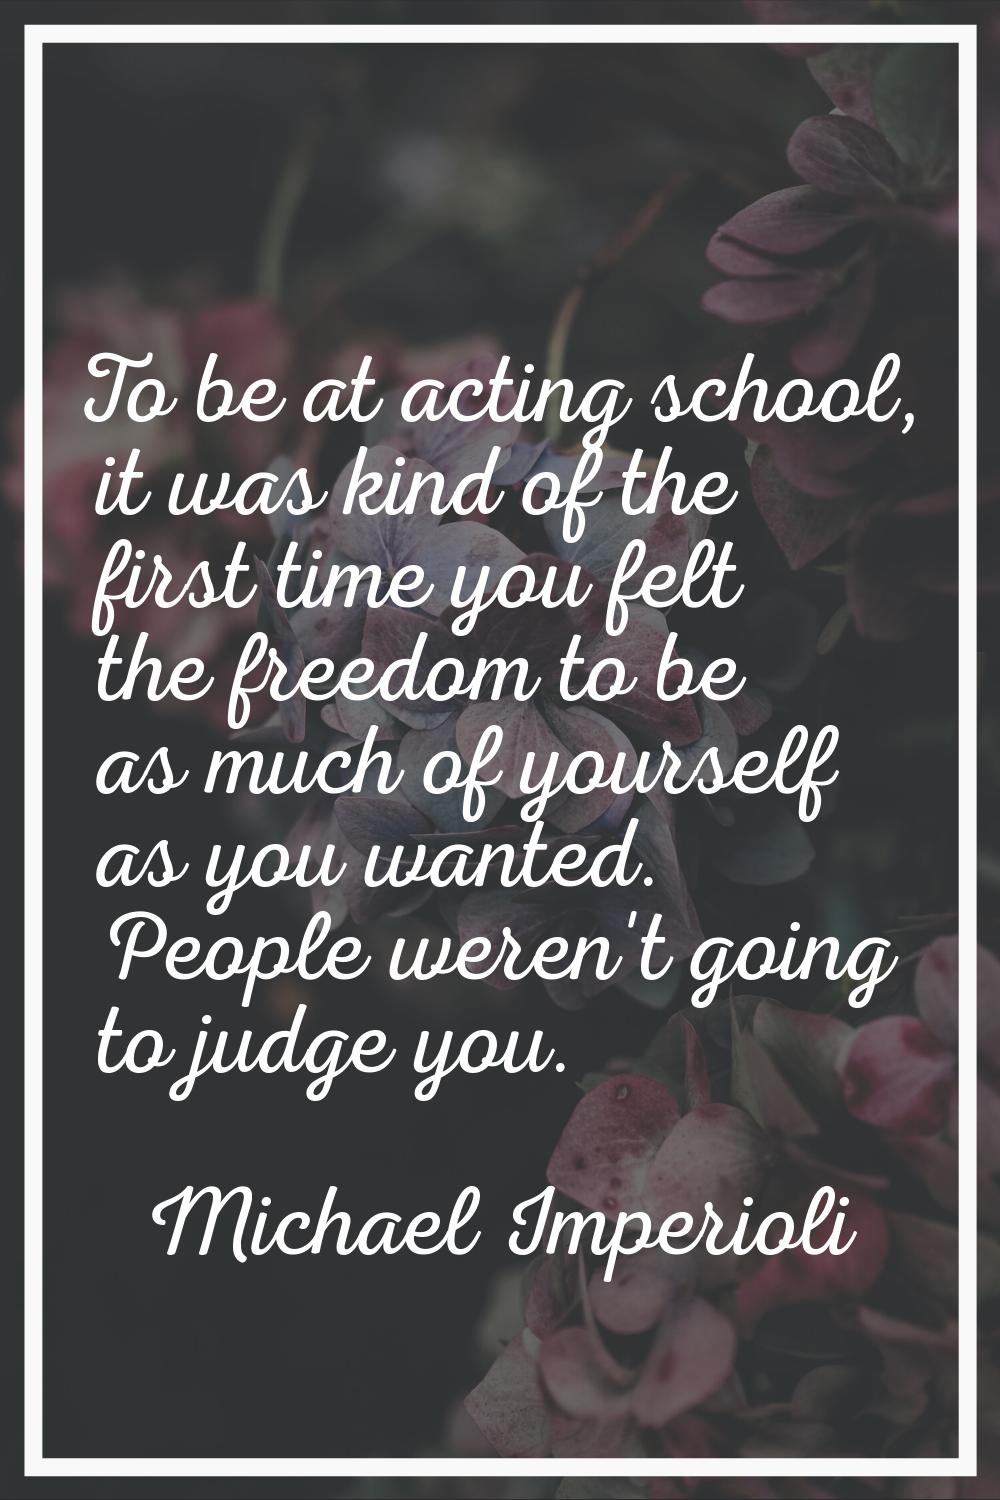 To be at acting school, it was kind of the first time you felt the freedom to be as much of yoursel